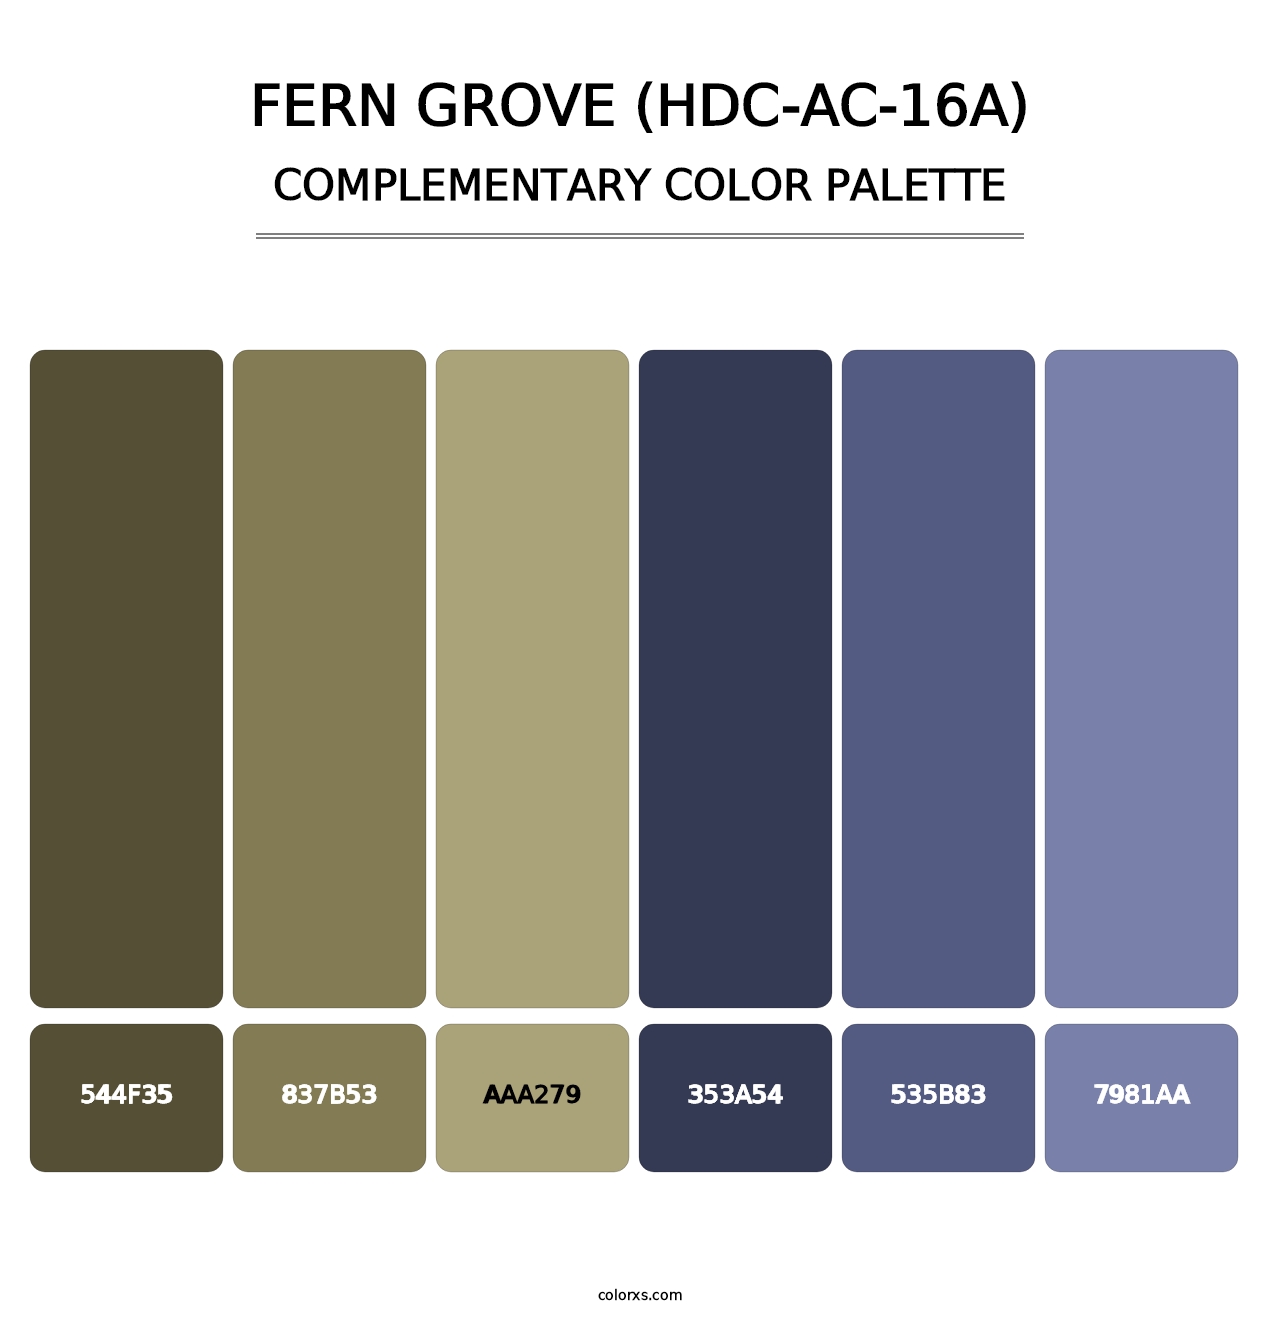 Fern Grove (HDC-AC-16A) - Complementary Color Palette